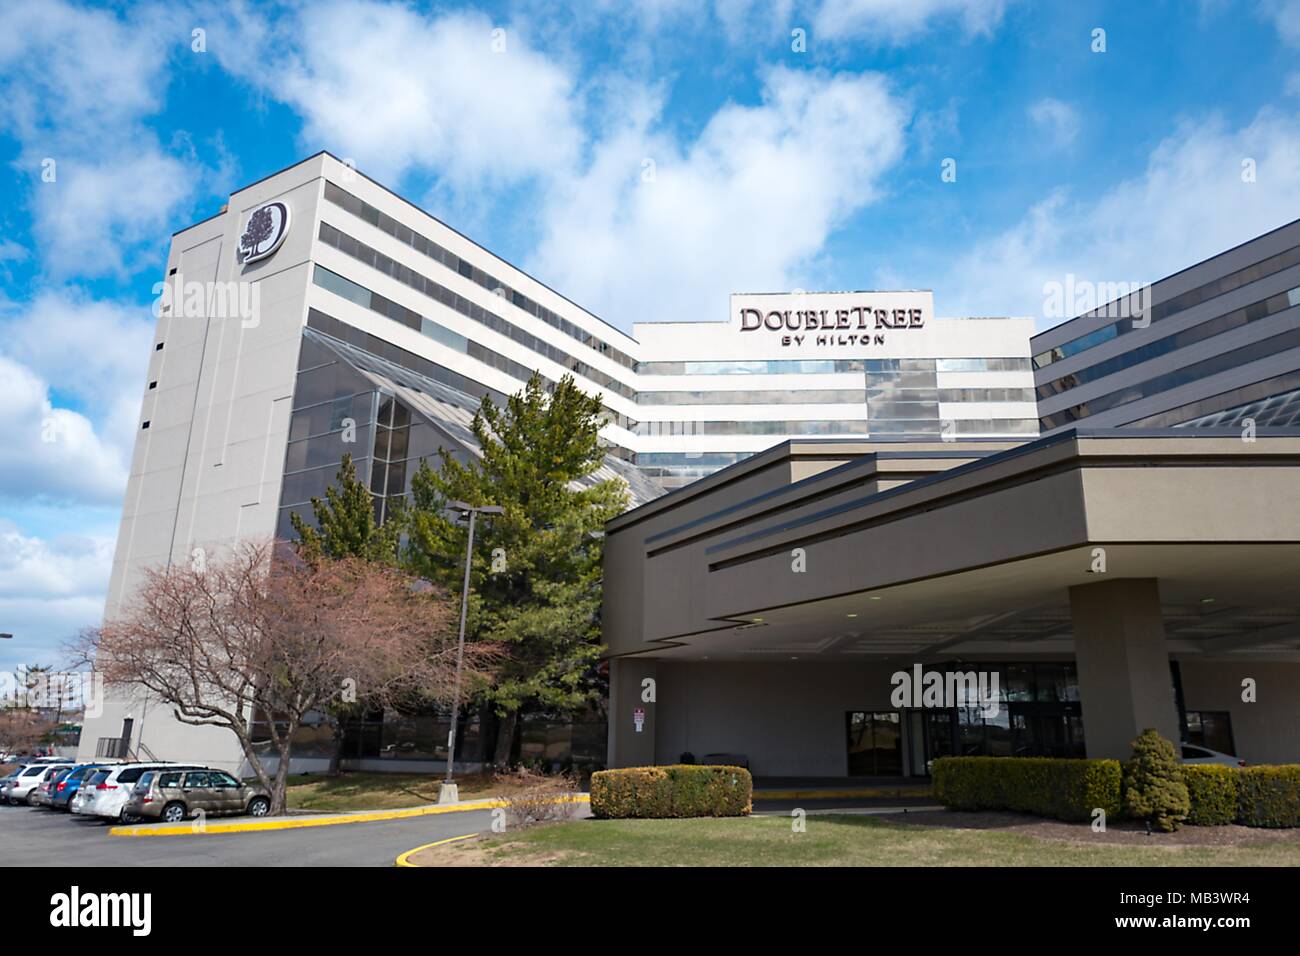 doubletree by hilton hotel newark airport new jersey